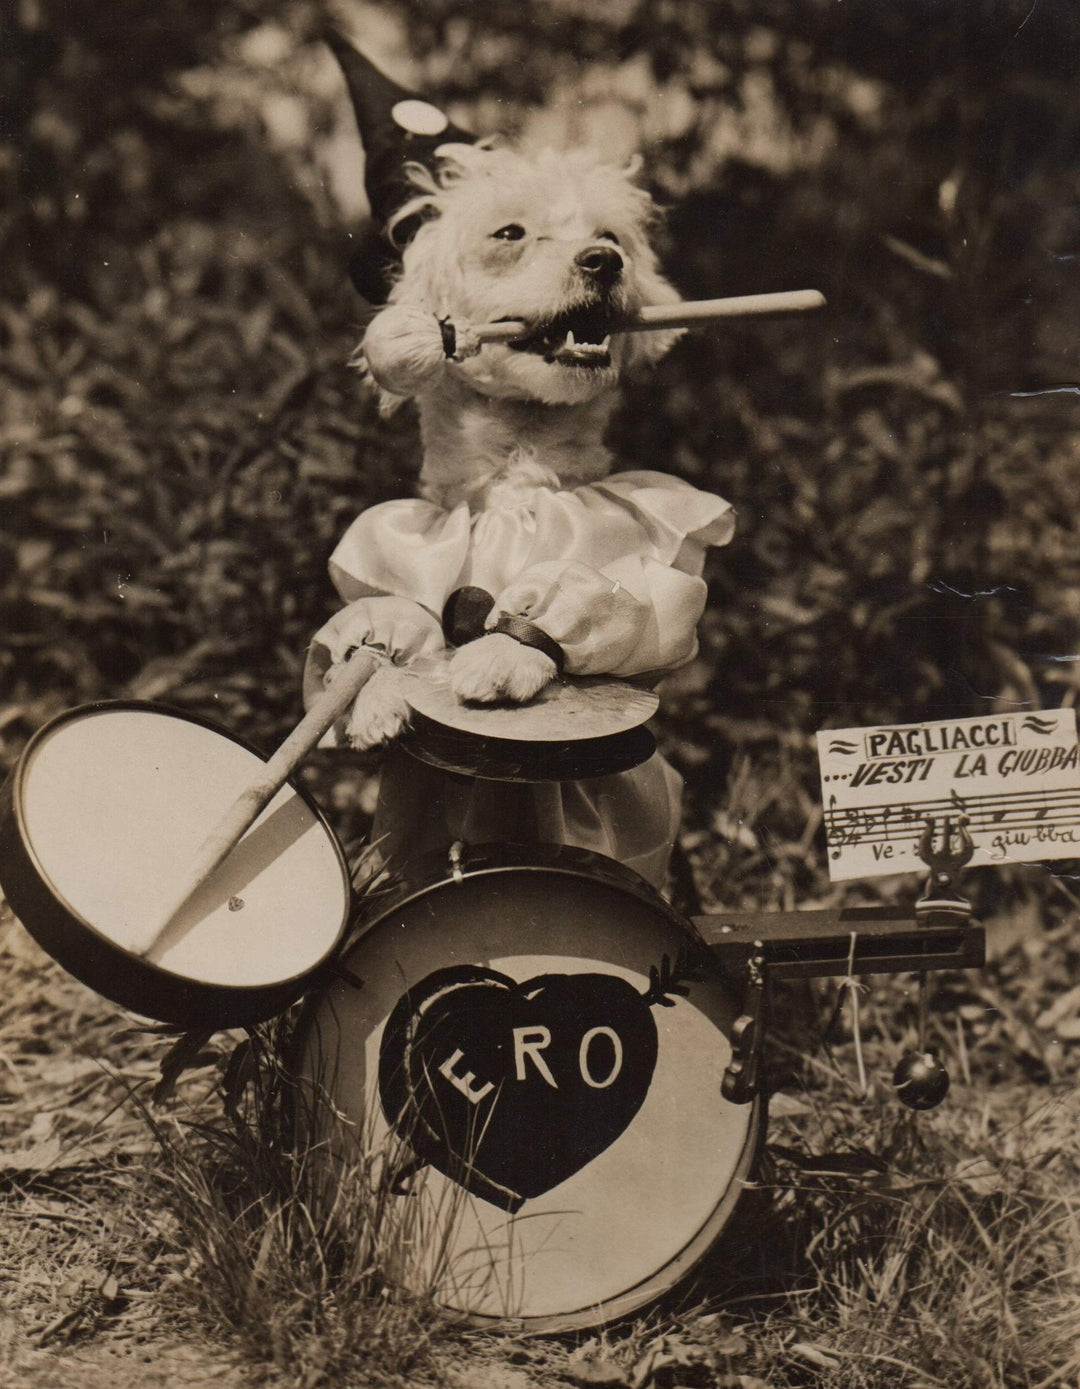 Pagliacci the Cute Clown Puppy Dog Vintage K-9 Snapshot Photo